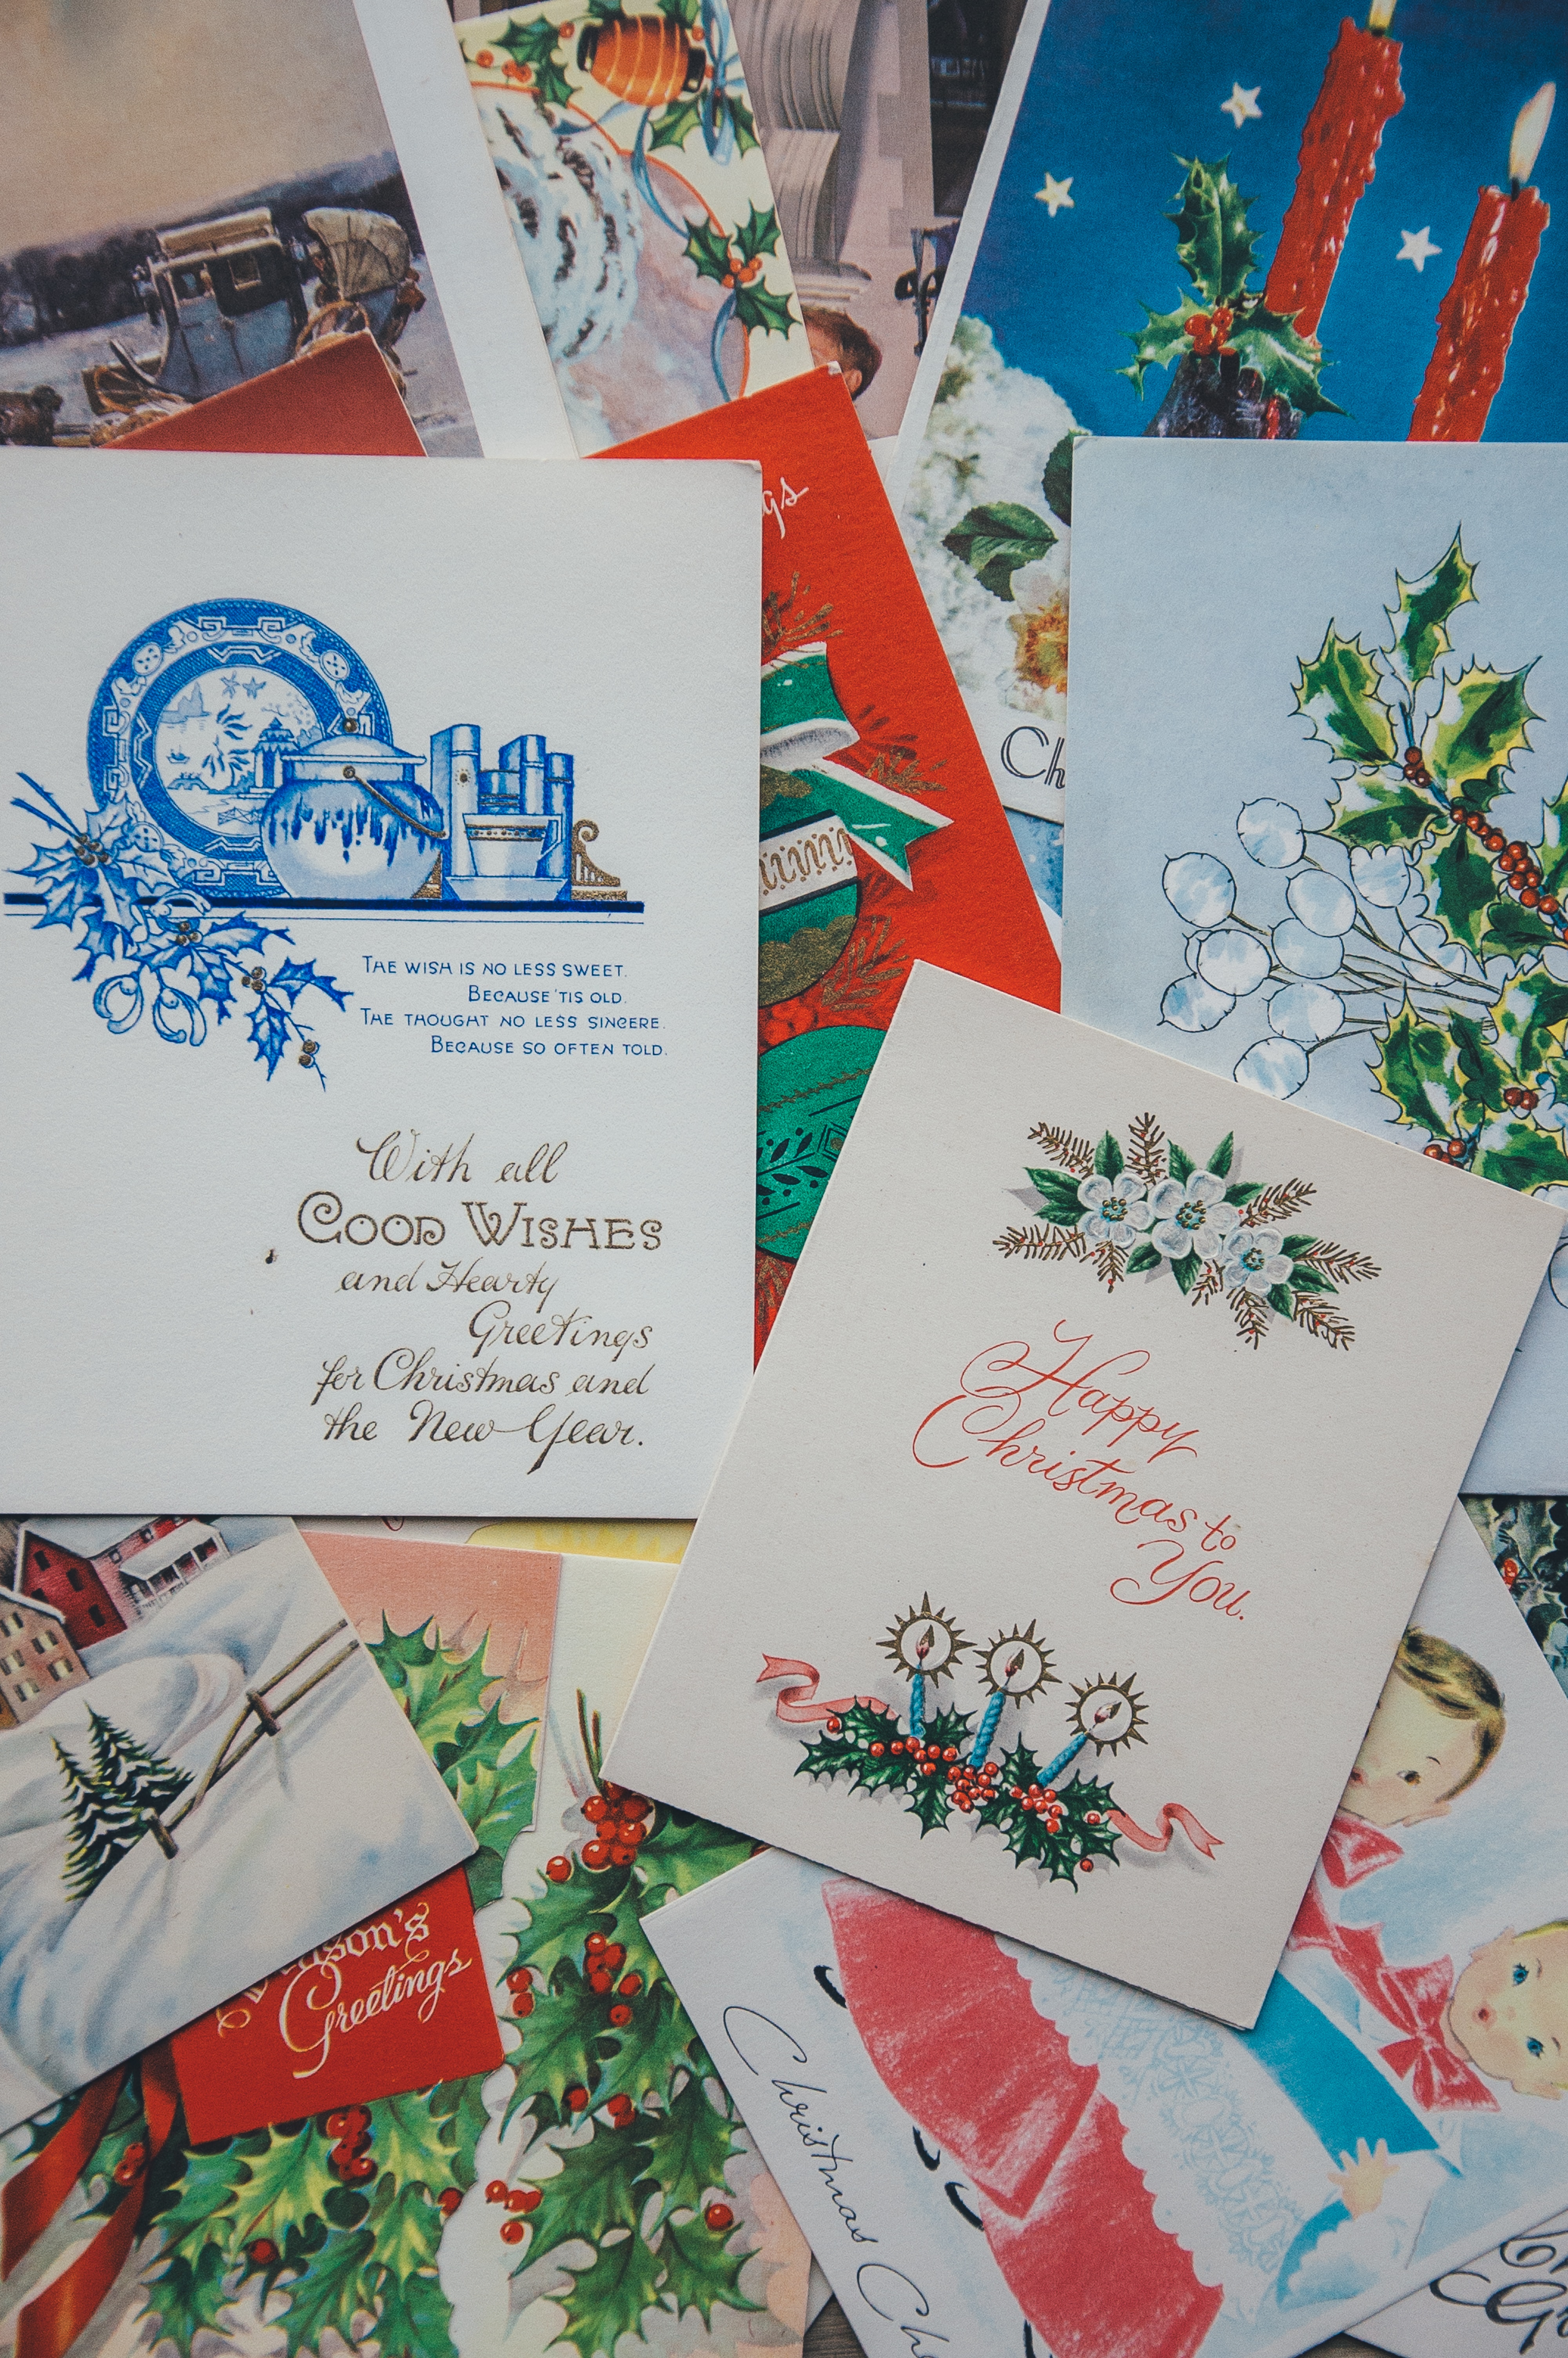 Greeting Cards Are Not a Thing of The Past: Here’s How You Can Use Them